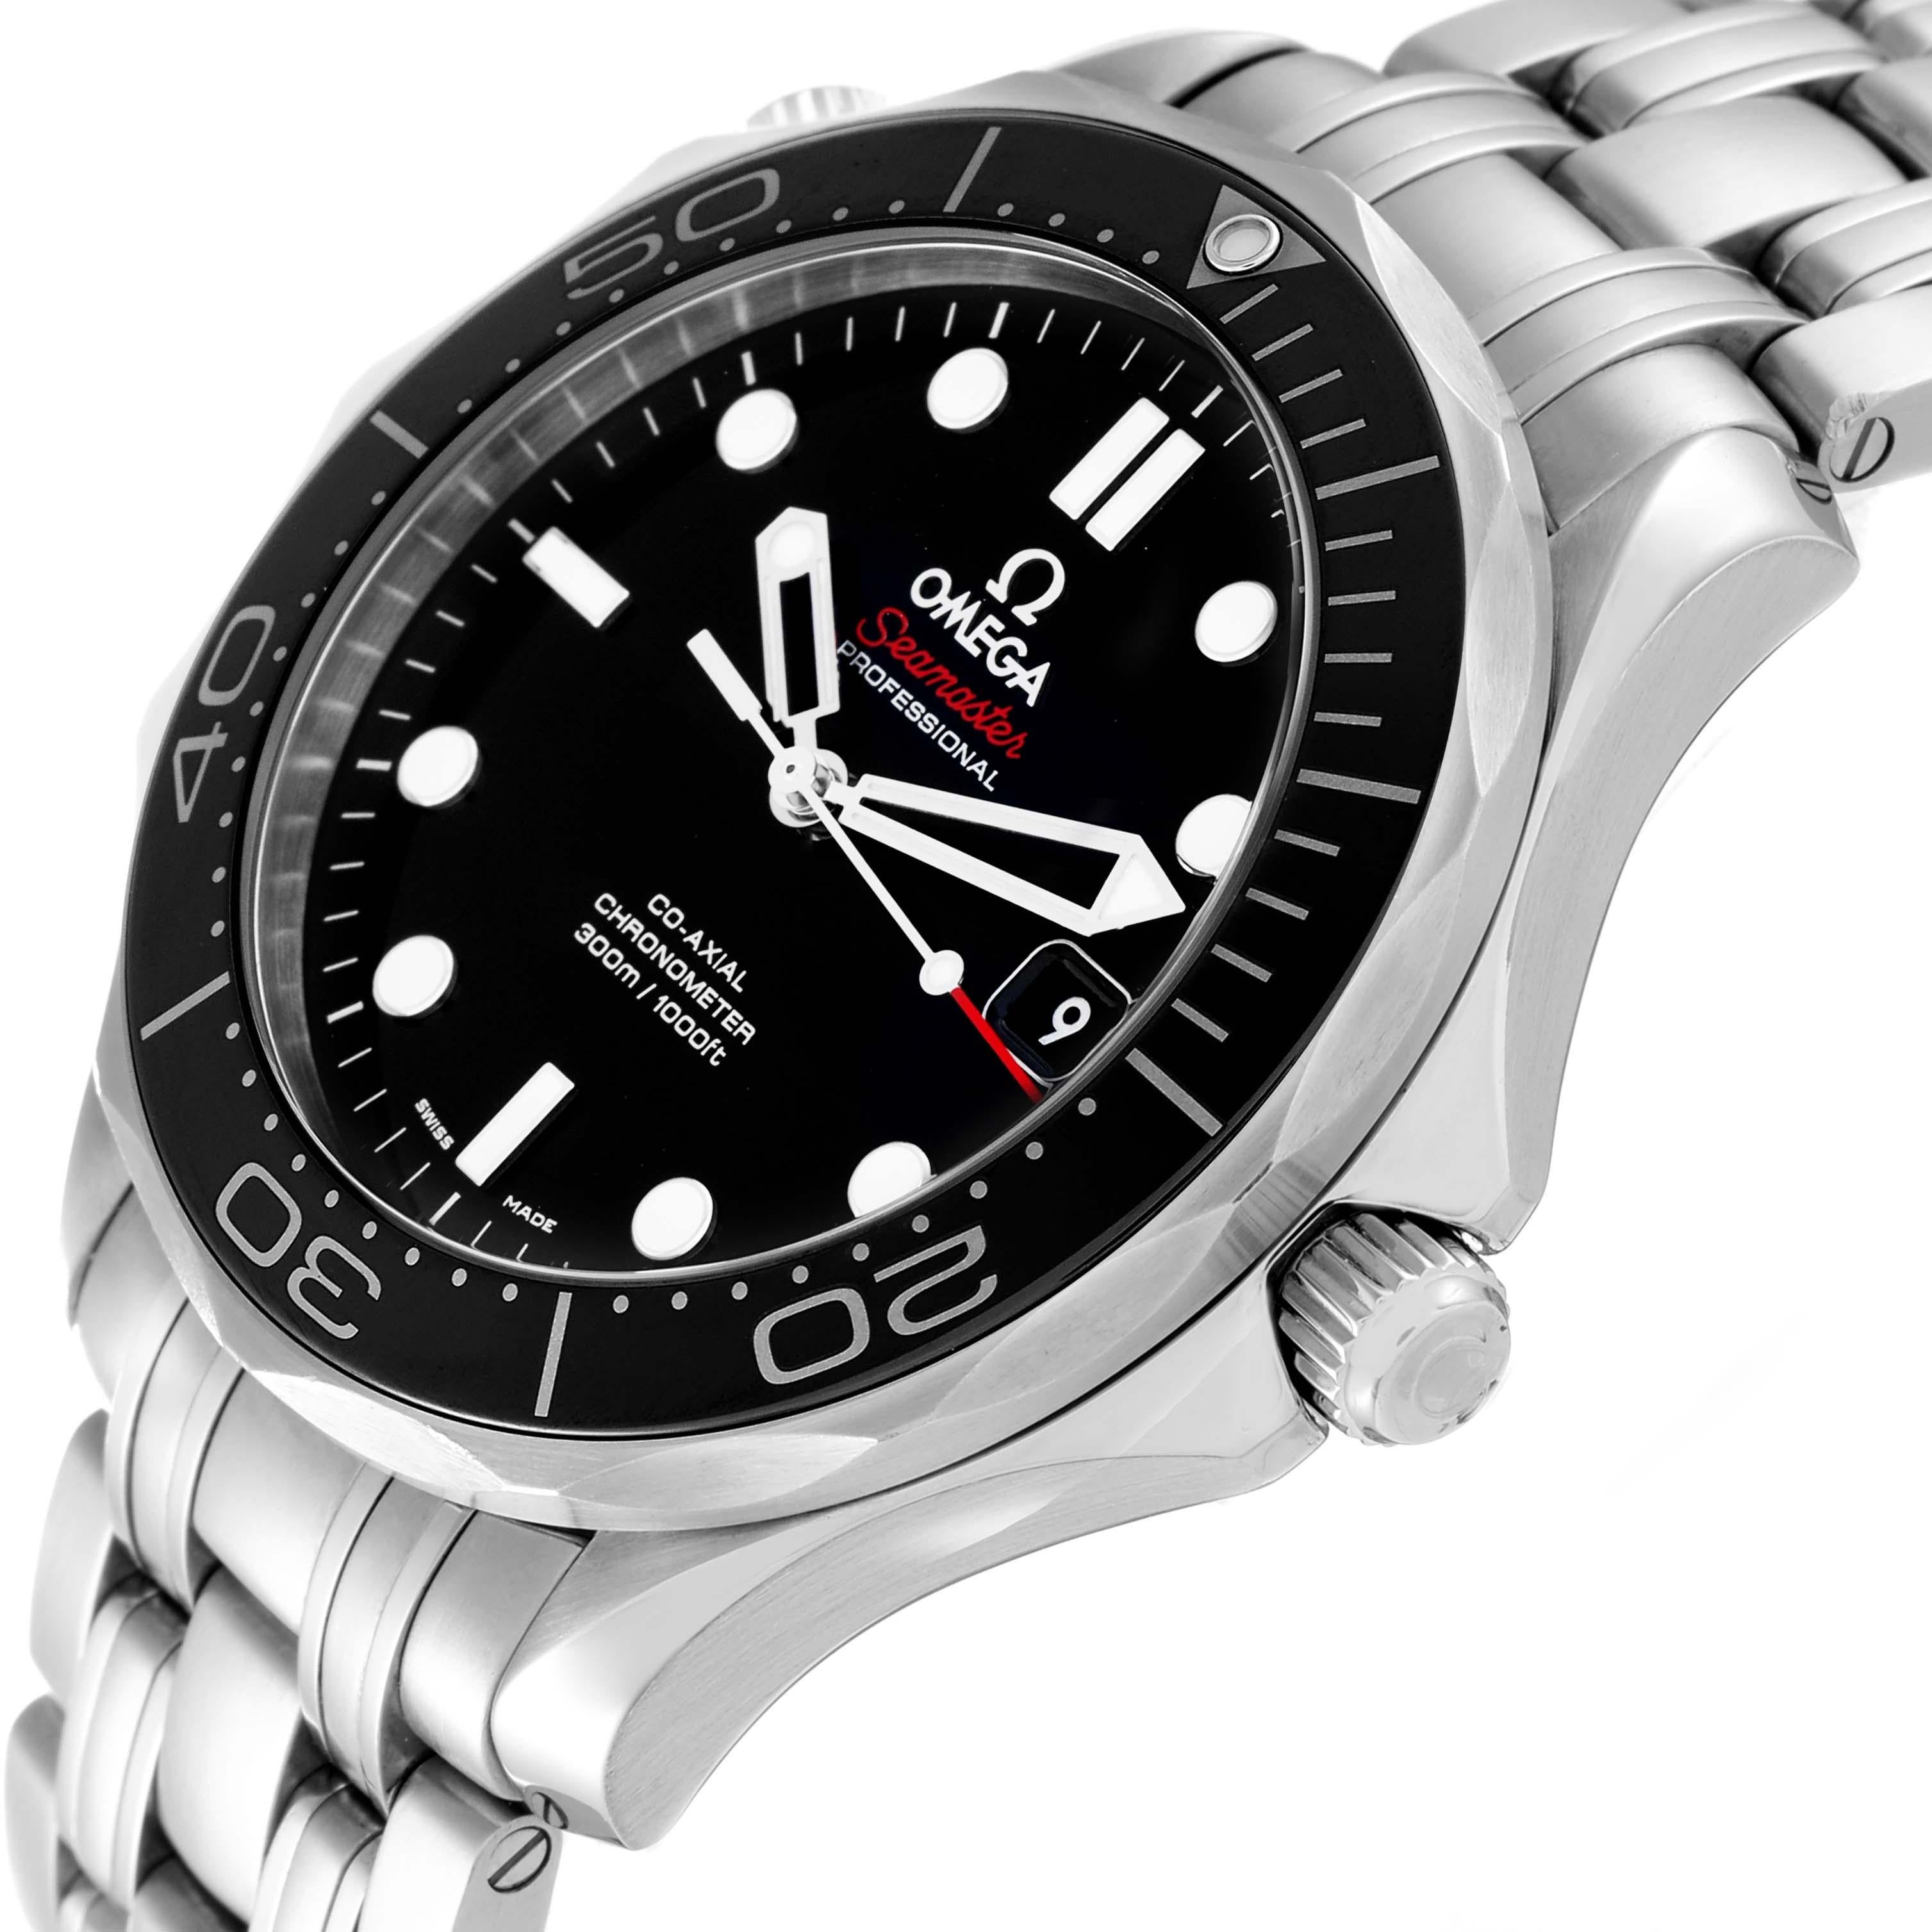 Omega Seamaster Diver 300M Steel Mens Watch 212.30.41.20.01.003 Box Card 1